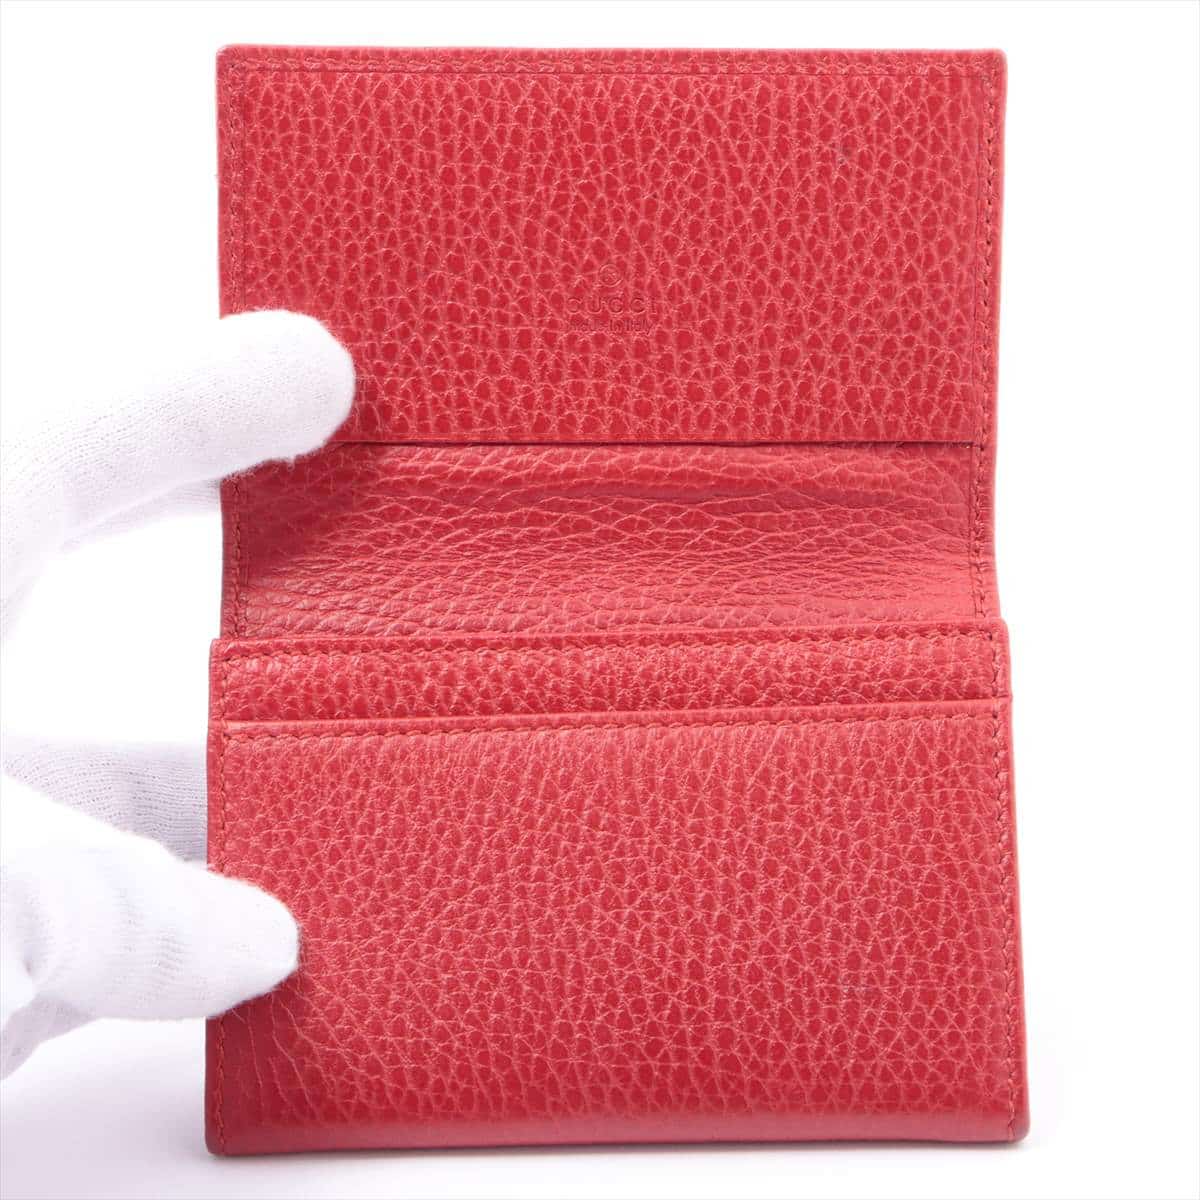 Gucci GG Marmont 474748 Leather Card case Red